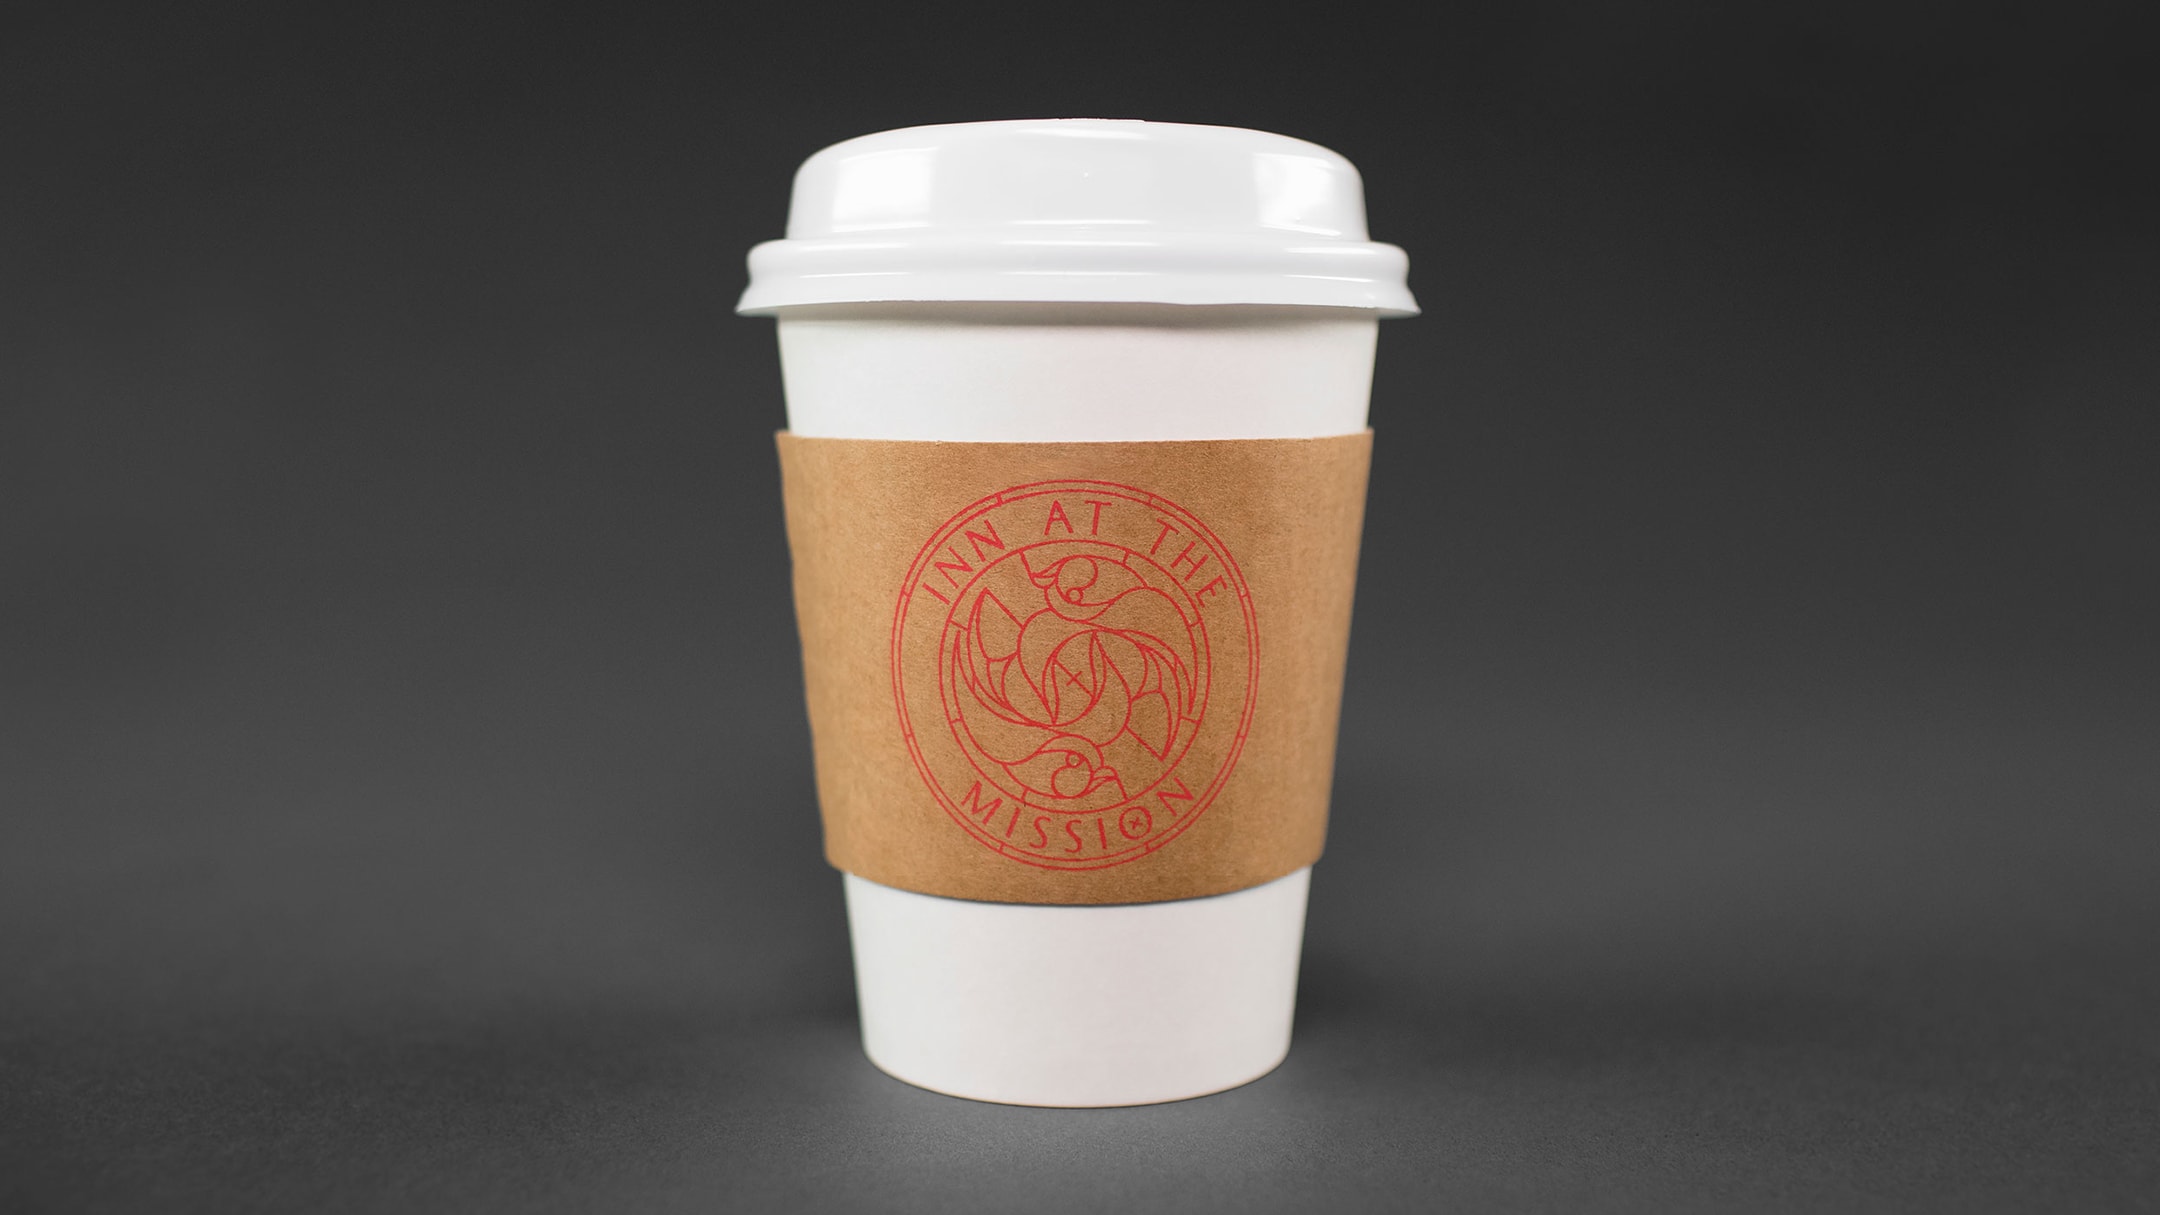 Inn At The Mission branded coffee sleeve